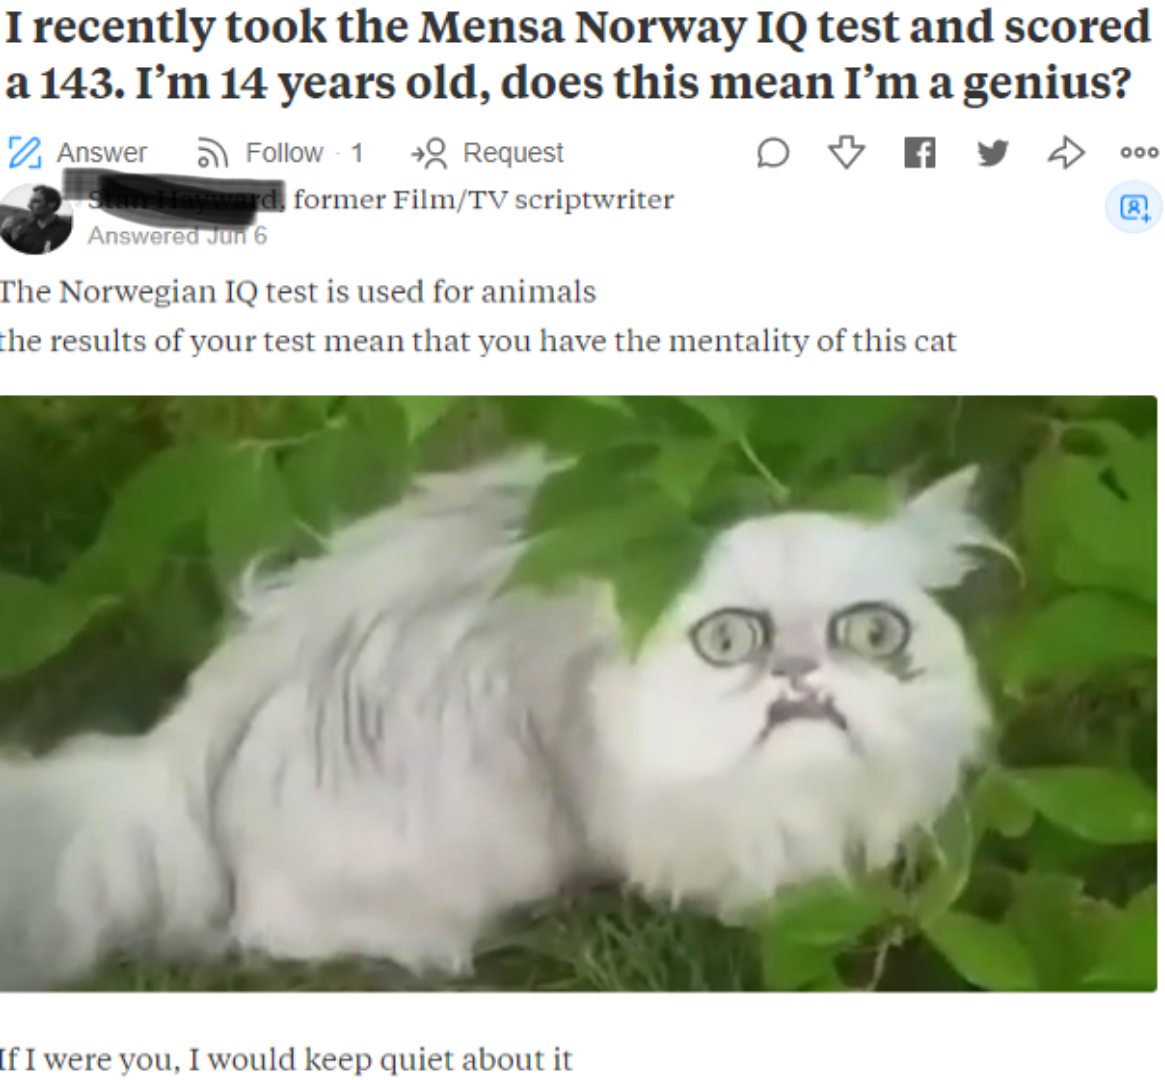 blink motherfucker - I recently took the Mensa Norway Iq test and scored a 143. I'm 14 years old, does this mean I'm a genius? 2 Answer a 1 Request D a y ... former FilmTv scriptwriter Answered 6 The Norwegian Iq test is used for animals the results of yo